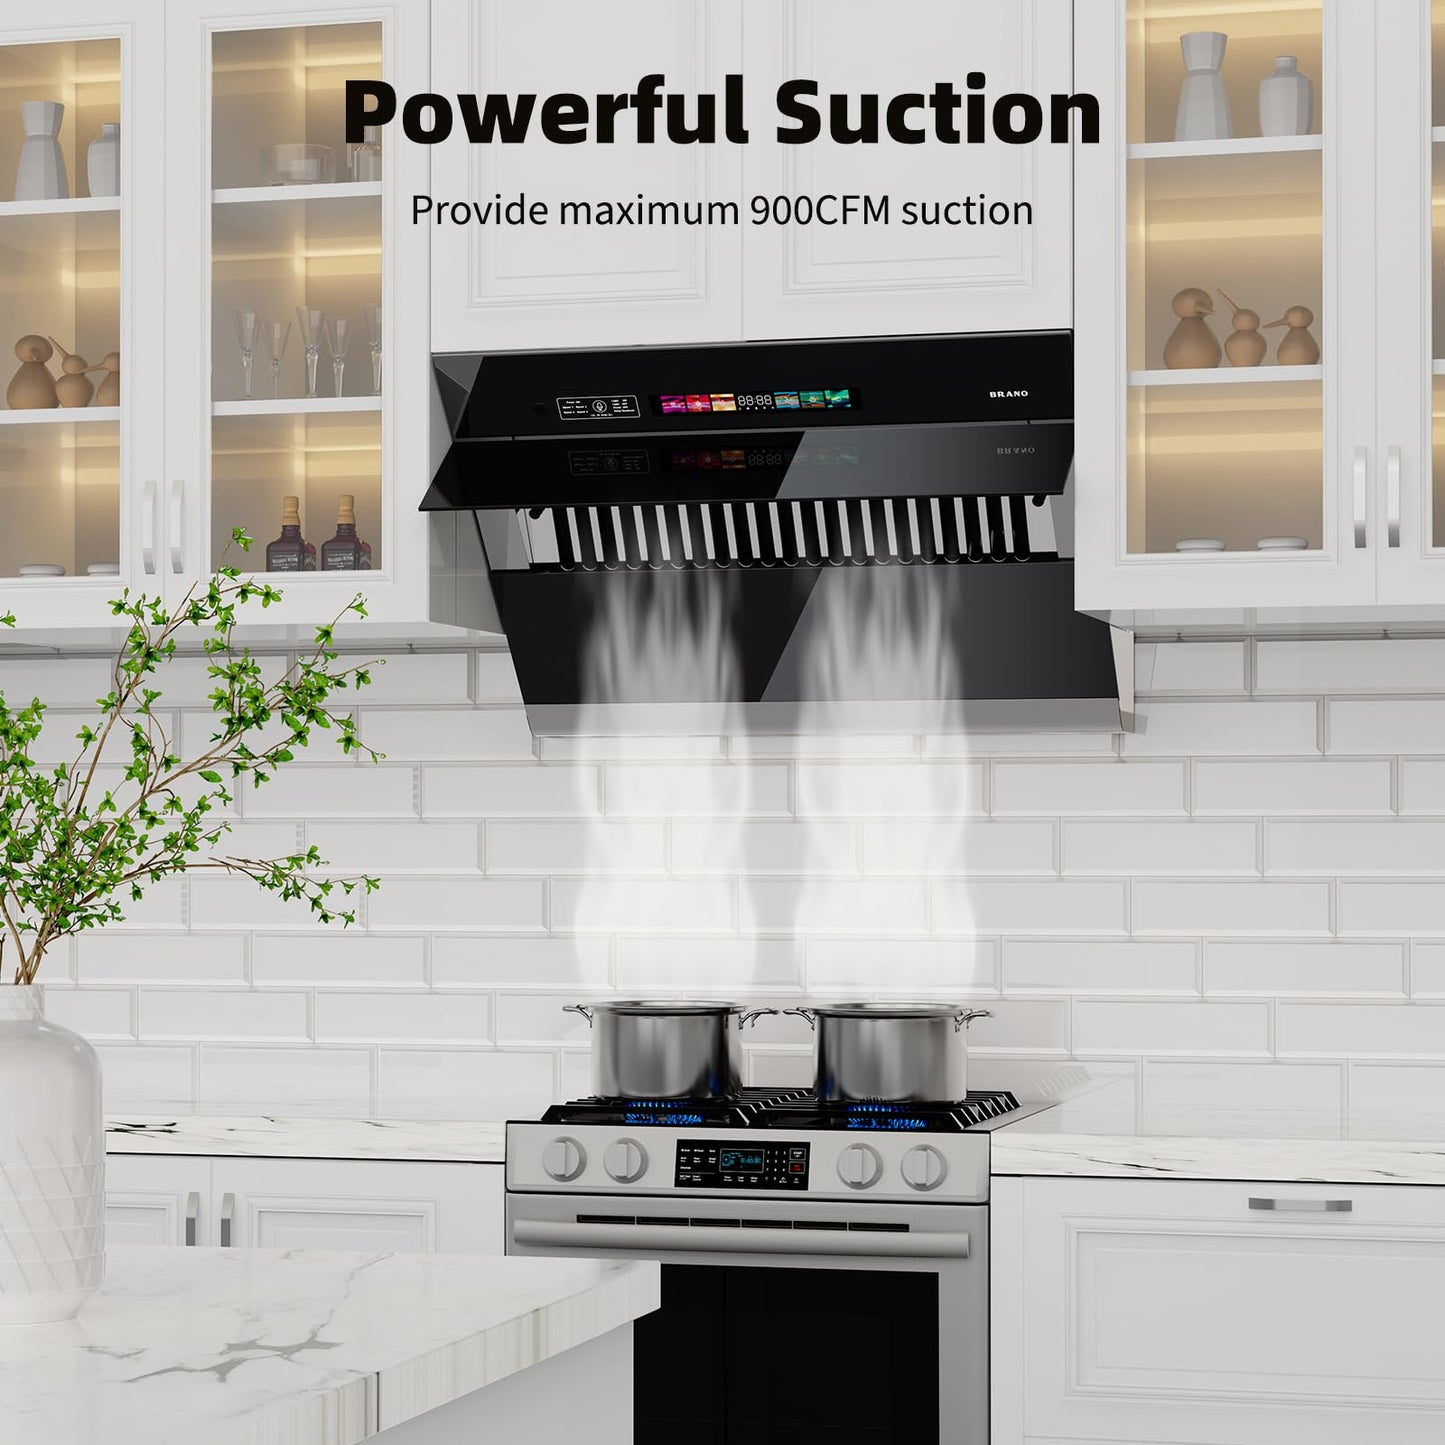 BRANO Range Hood 30 inch with 900CFM, Voice/Gesture Sensing/Touch Control Panel, Unique Side-Draft Design for Under Cabinet Modern Kitchen Hood, Ducted/Ductless Convertible